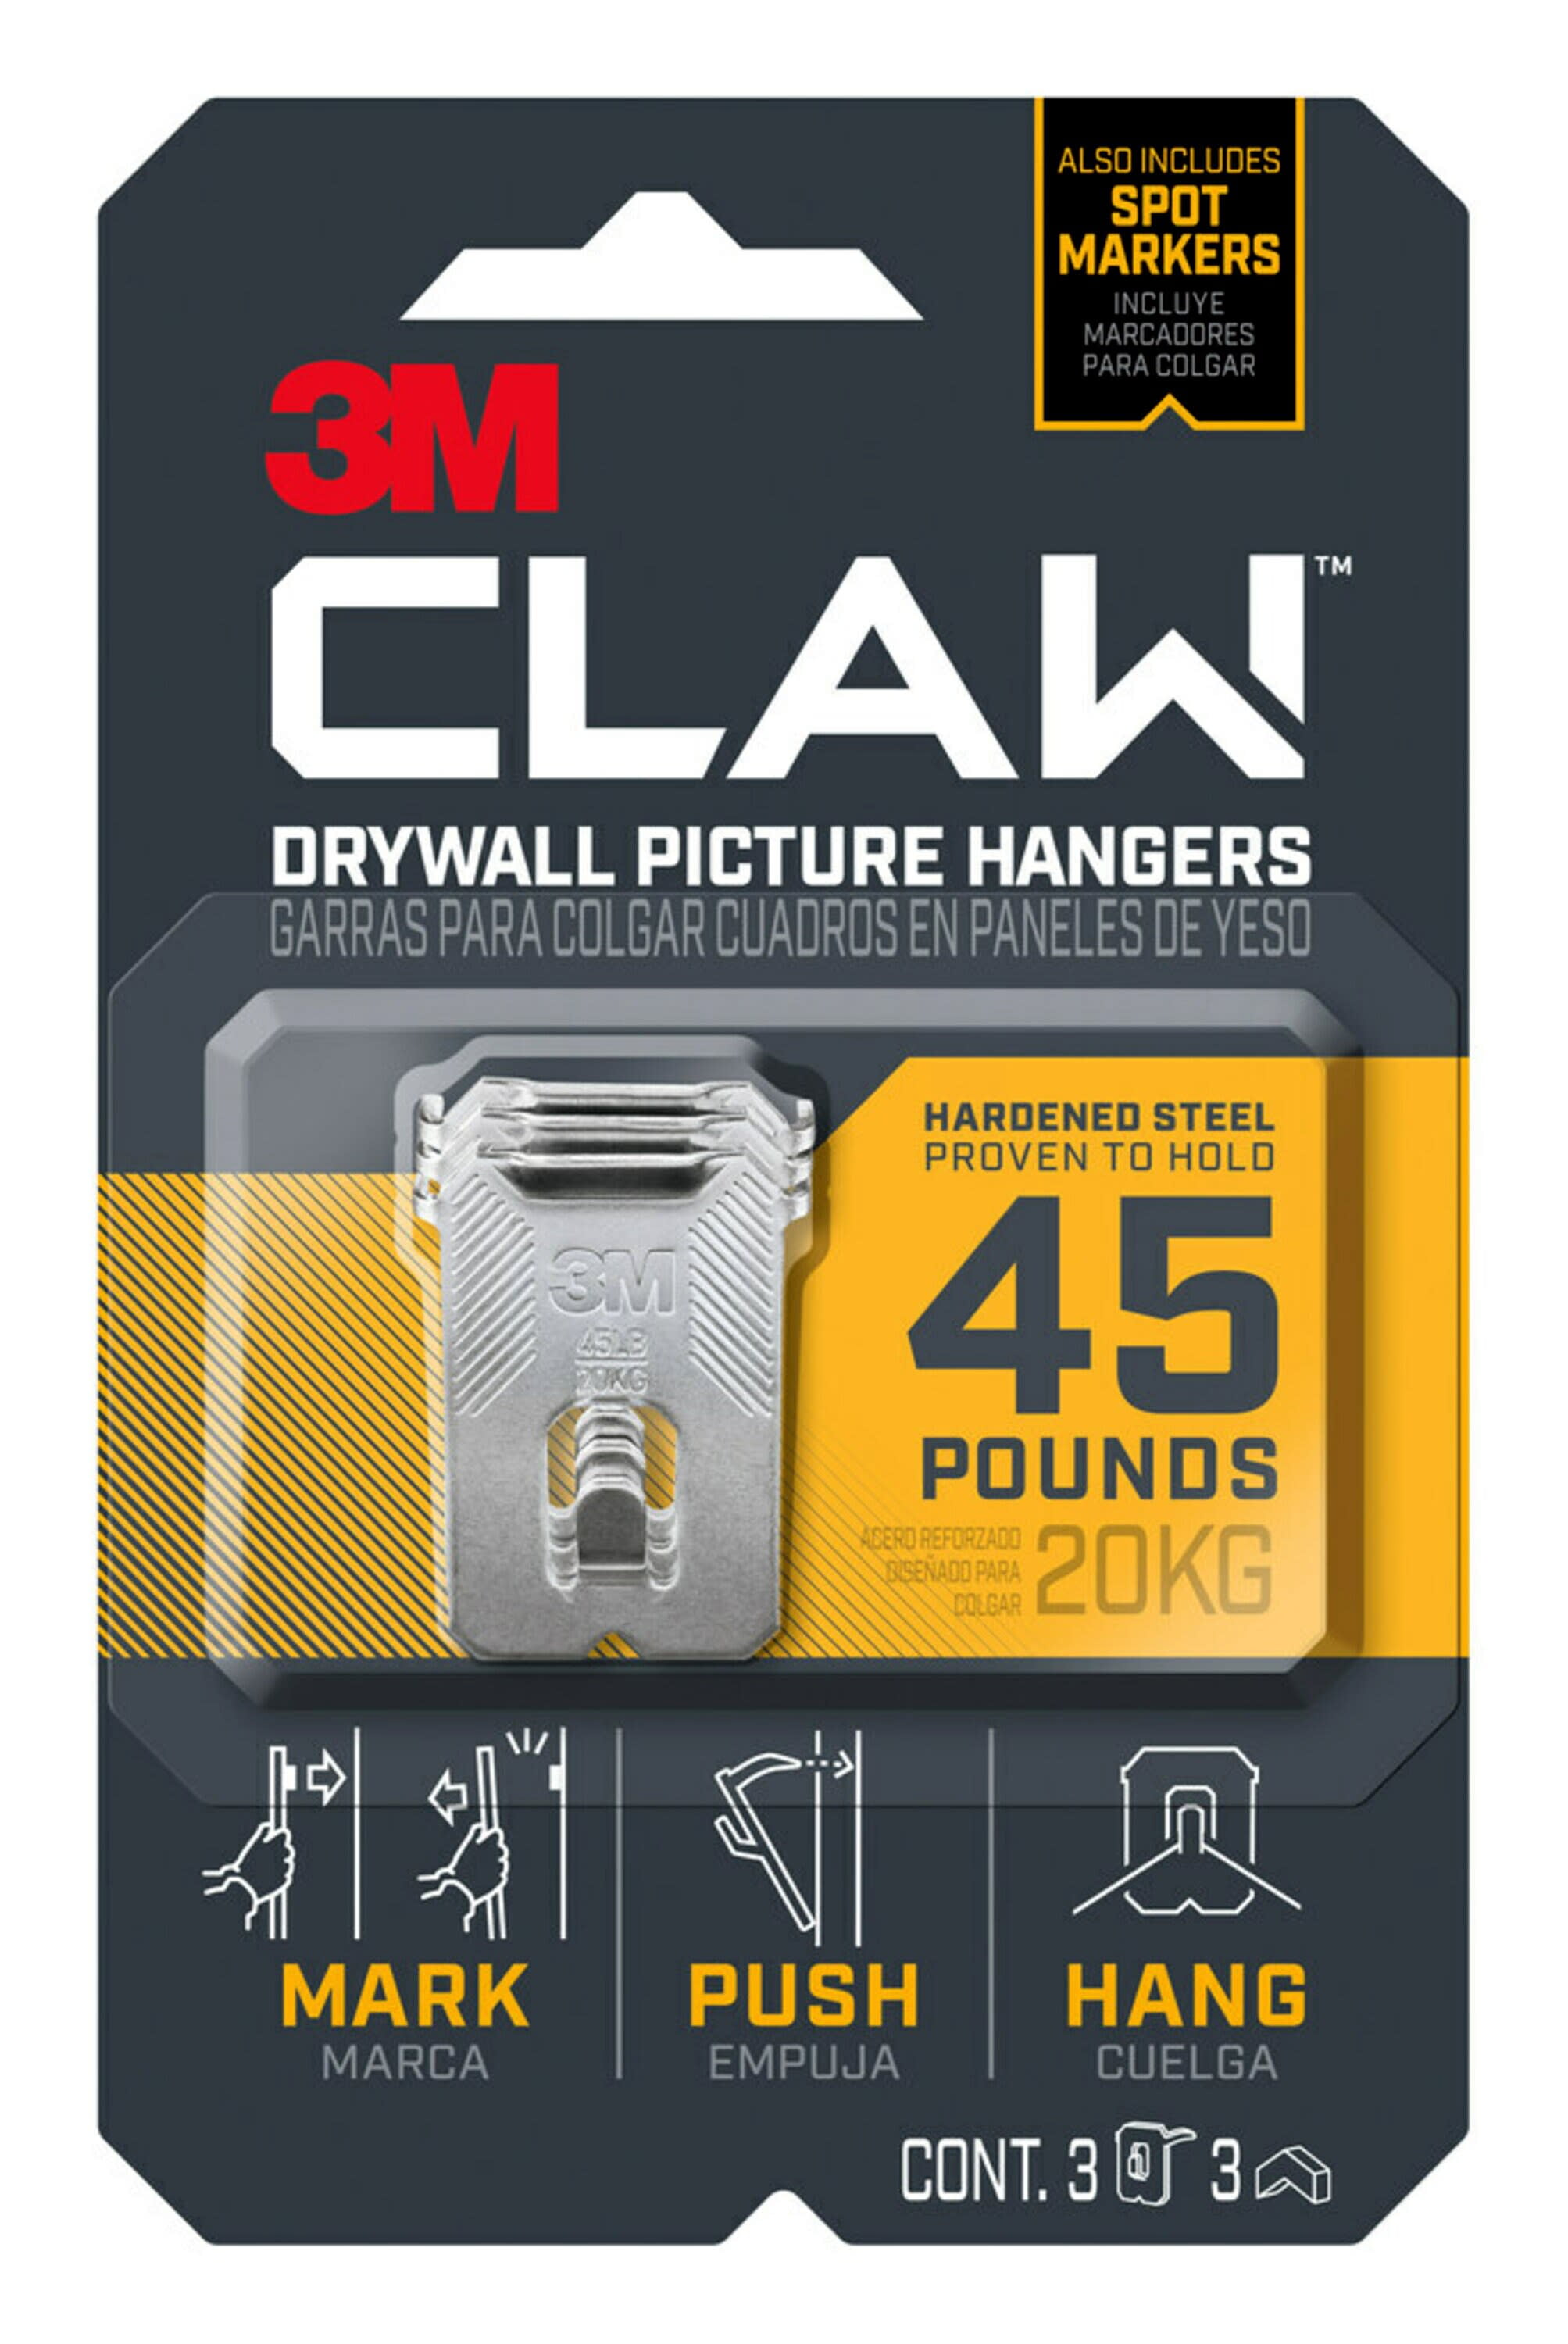 3M CLAW Drywall Picture Hanger with Temporary Spot Marker, holds 45 lbs, 3 Hangers + 3 Markers/Pack